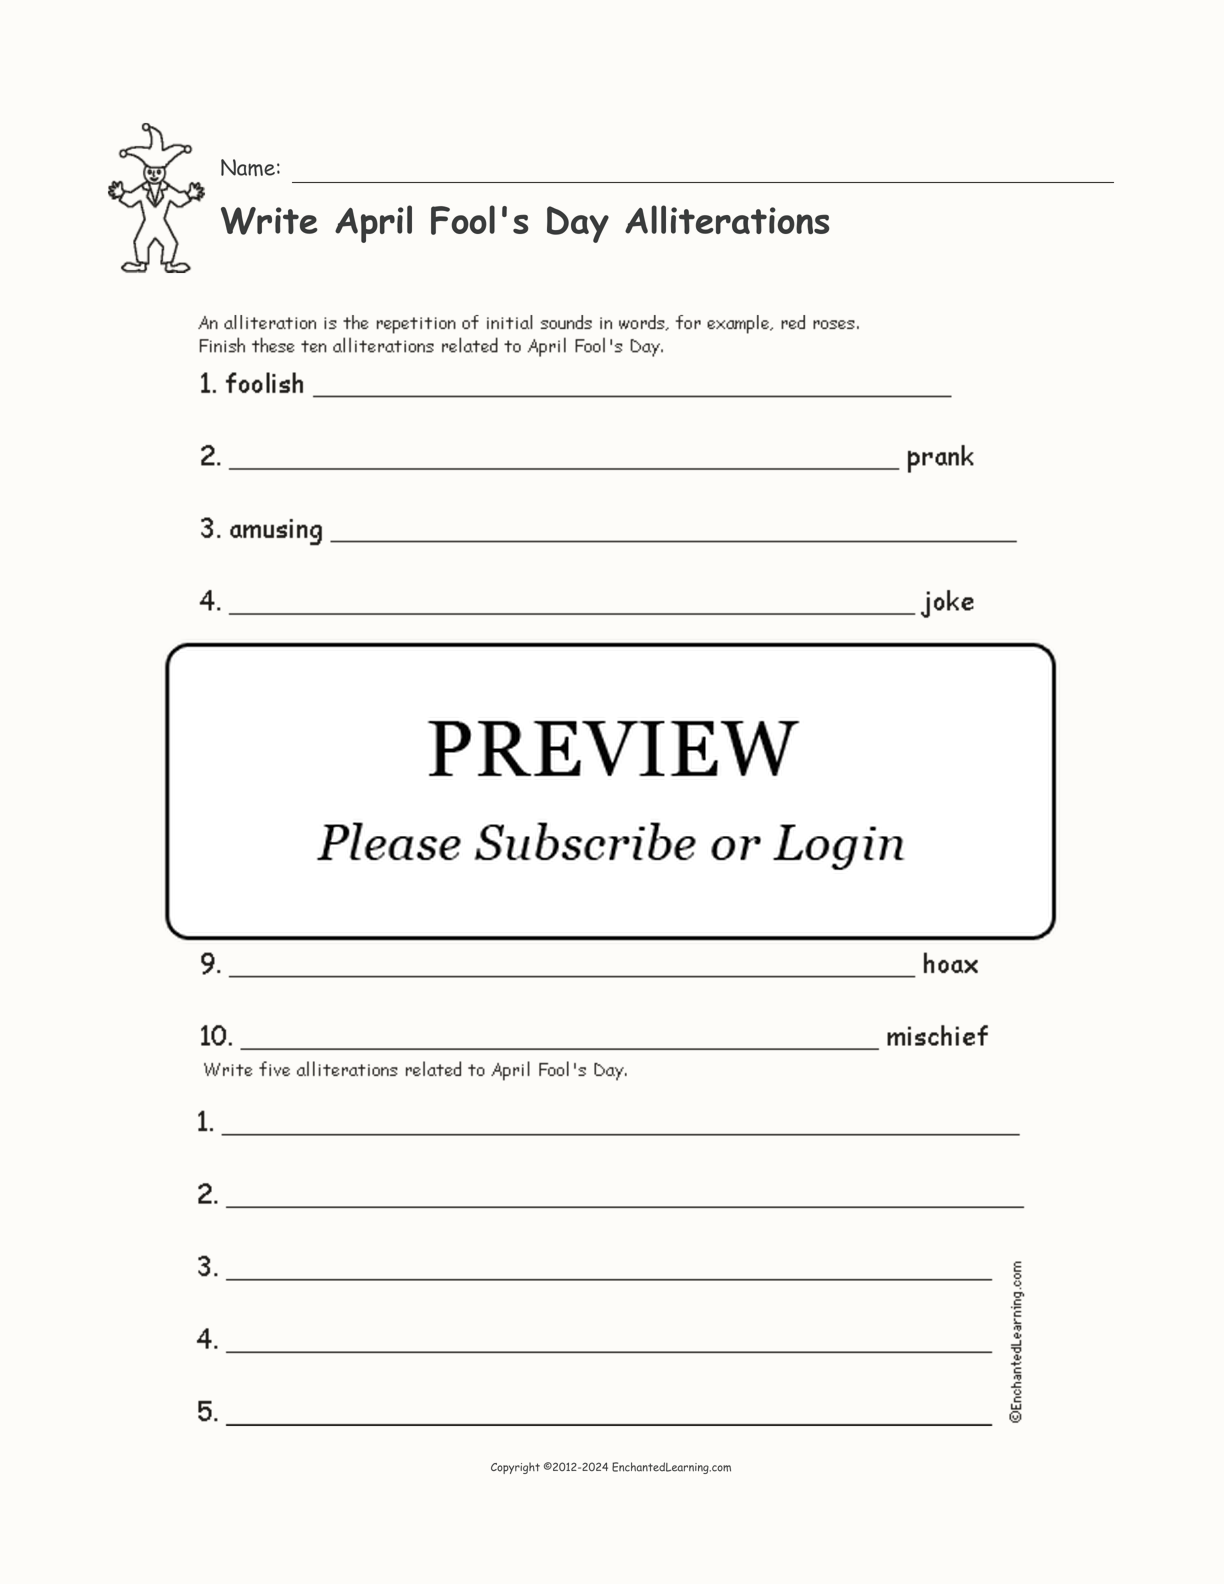 Write April Fool's Day Alliterations interactive worksheet page 1